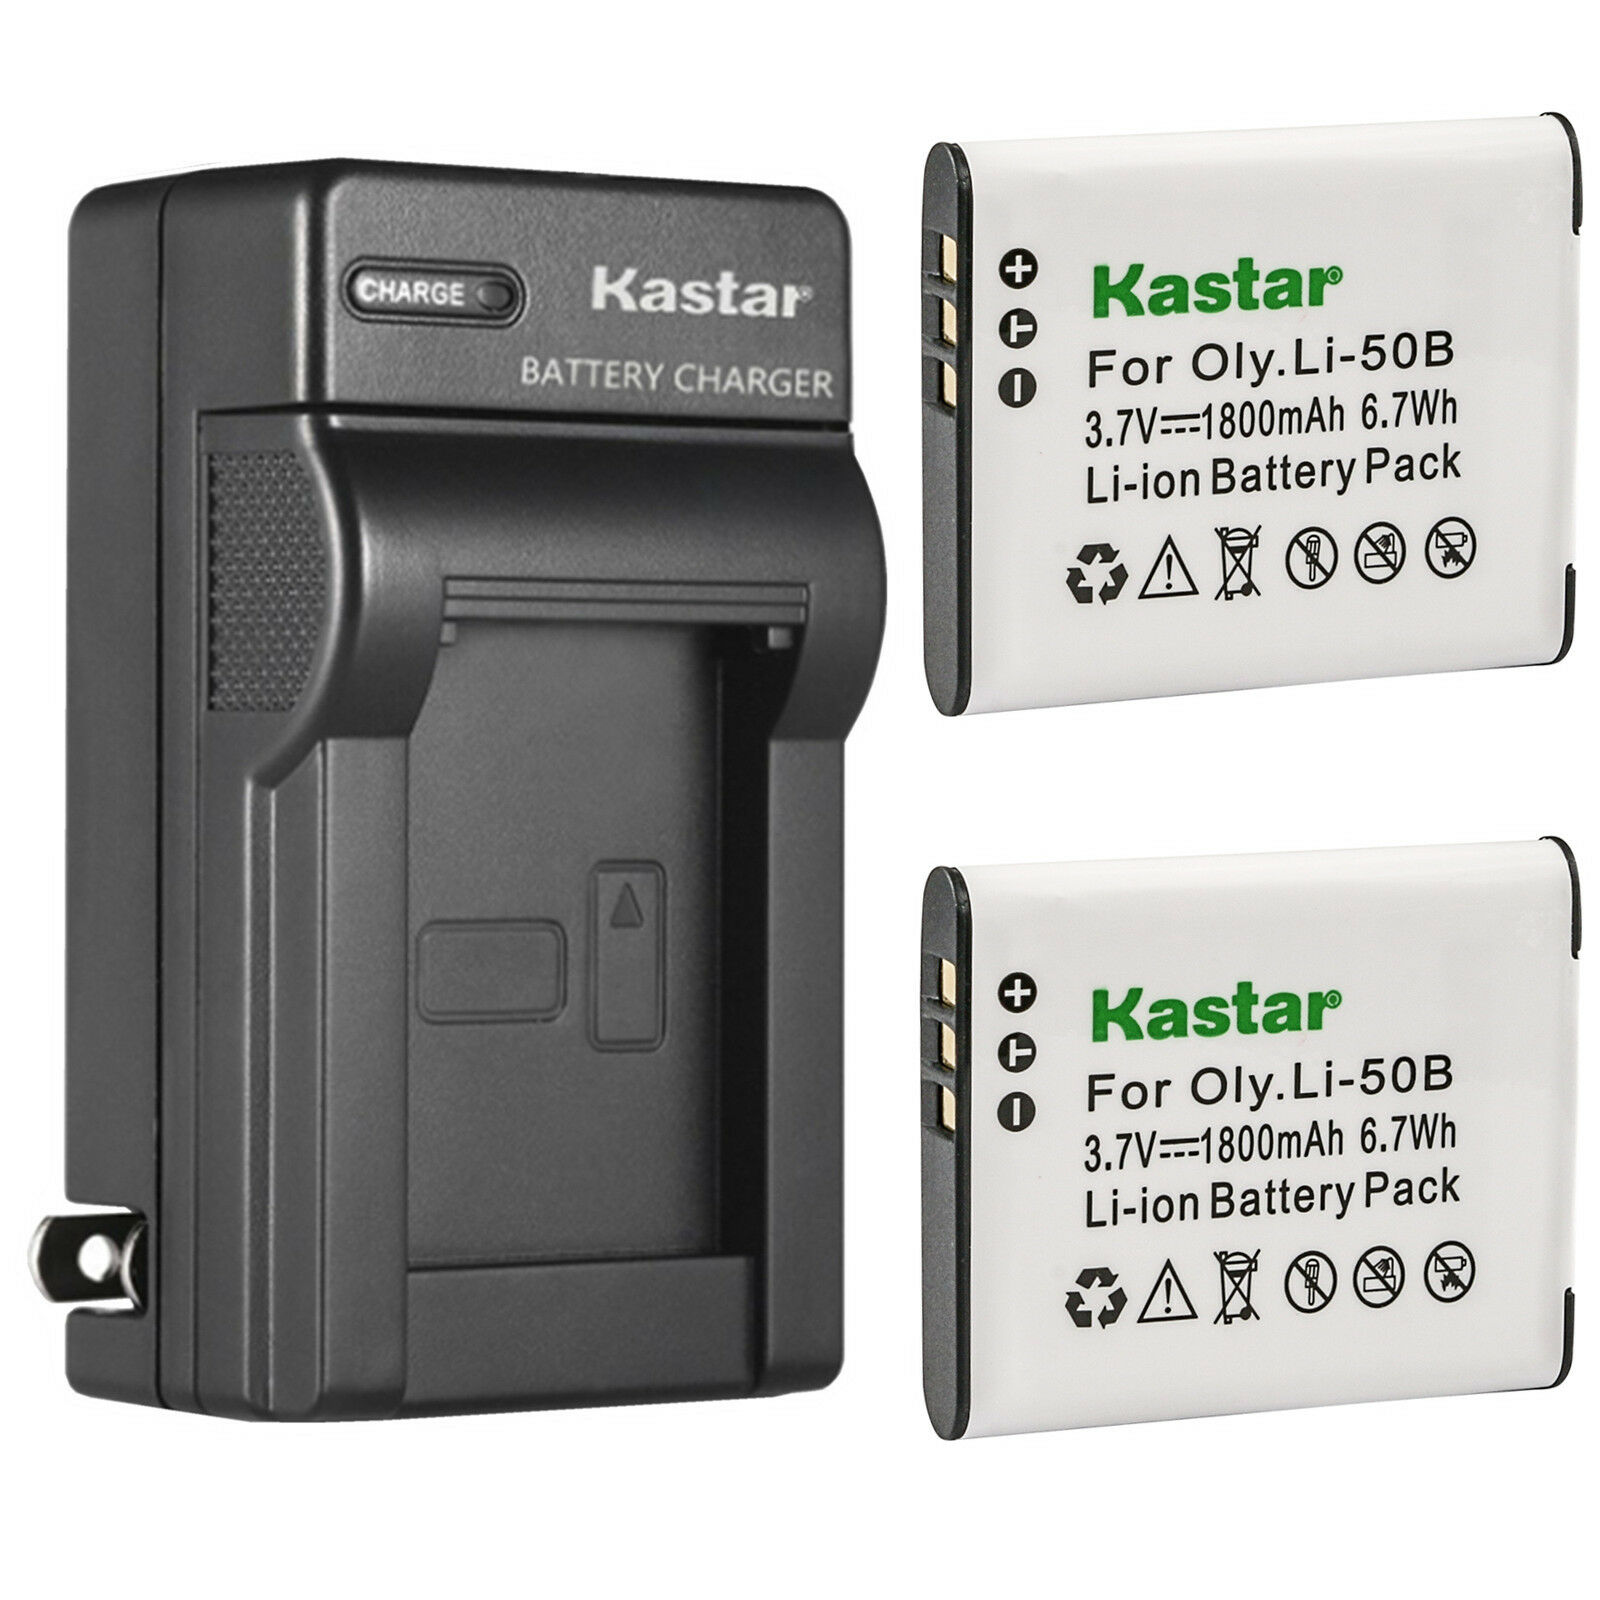 Kastar 2-Pack Battery and AC Wall Charger Replacement for Olympus Li-50B, Tough TG-620 iHS, Tough TG-630 iHS, Tough TG-805, Tough TG-810, Tough TG-820 iHS, Tough TG-830 iHS, Tough TG-835, Tough TG-850 - image 1 of 6